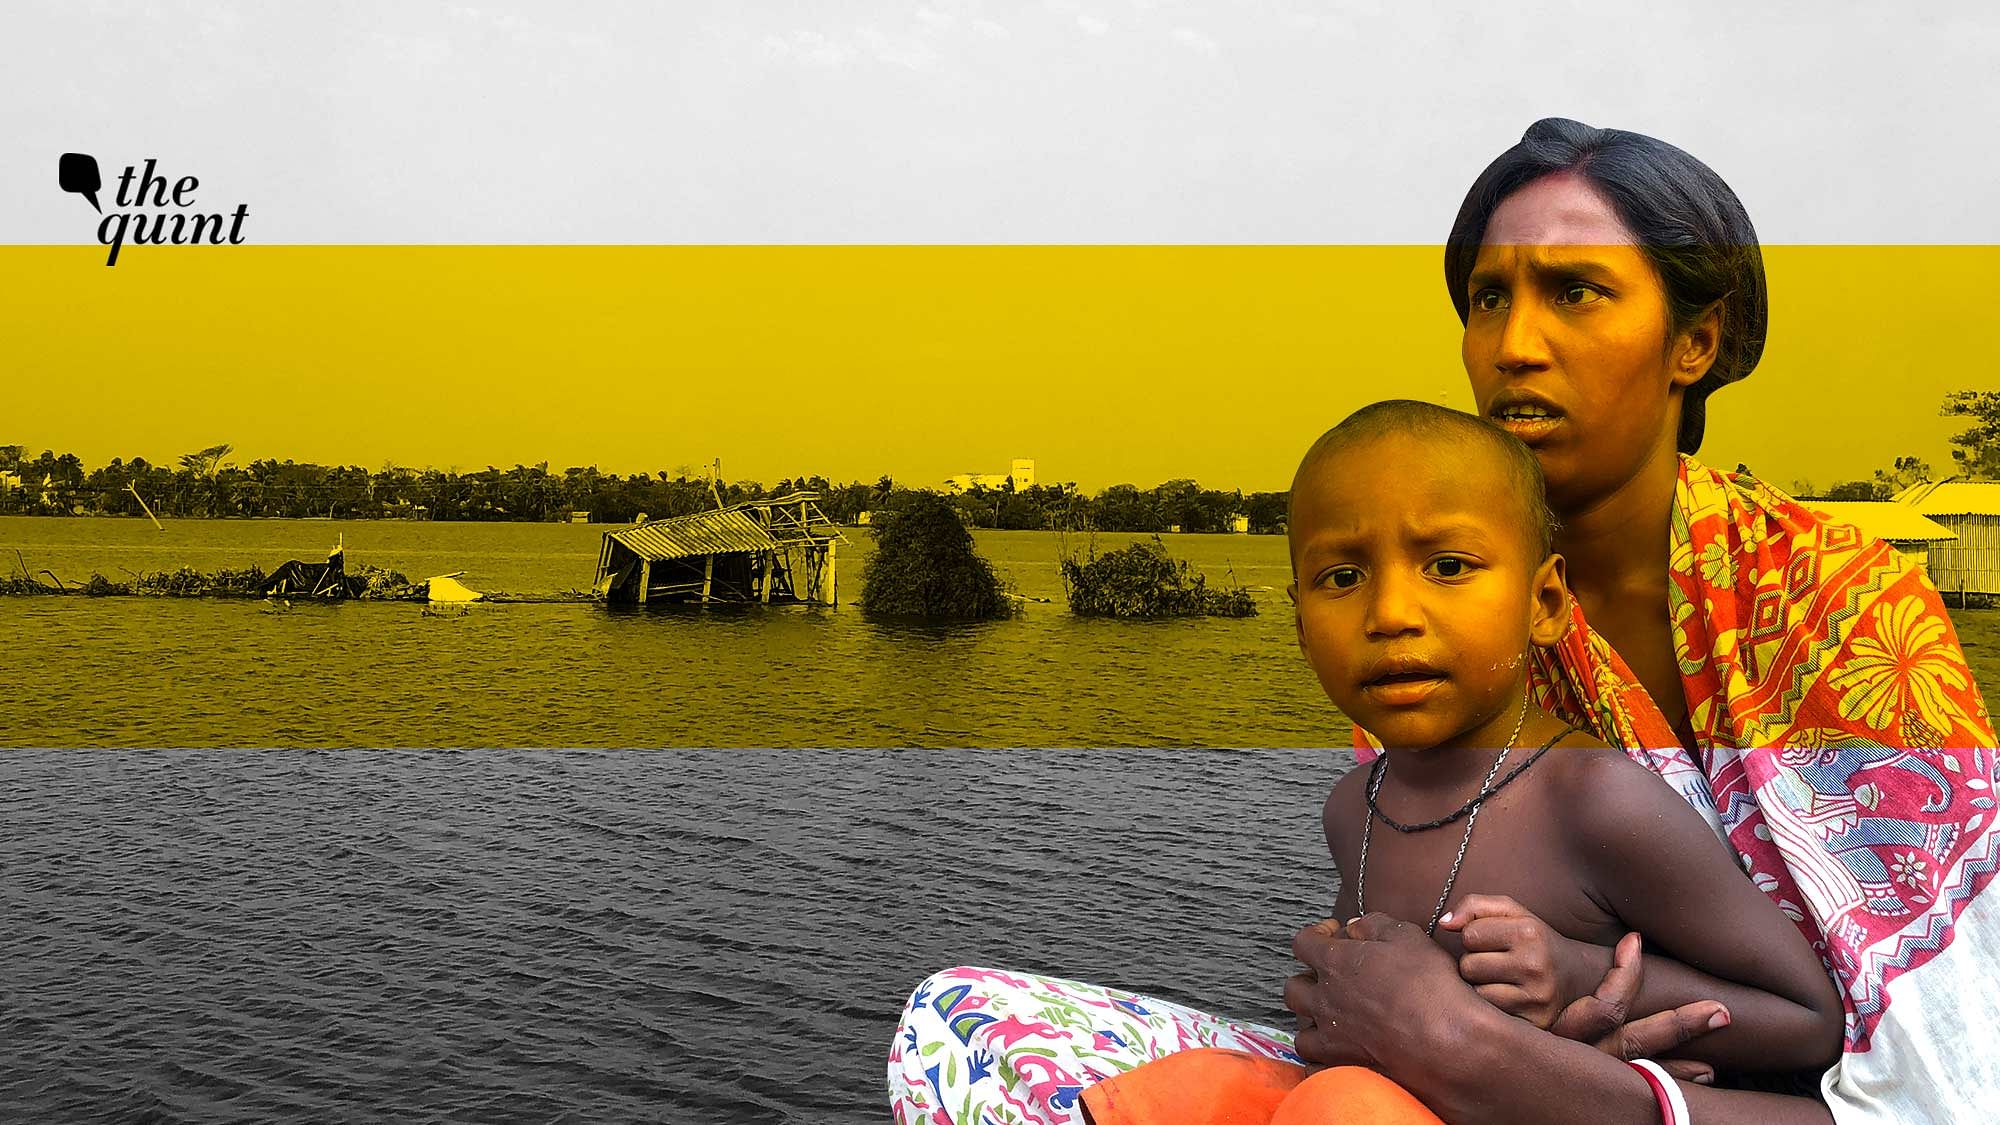 The Quint visited the Atpukur village – where fishing is the dominant source of livelihood – like most villages in the Minakhan Assembly constituency of the North 24 Parganas district. What we saw was a picture of death, devastation and helplessness.